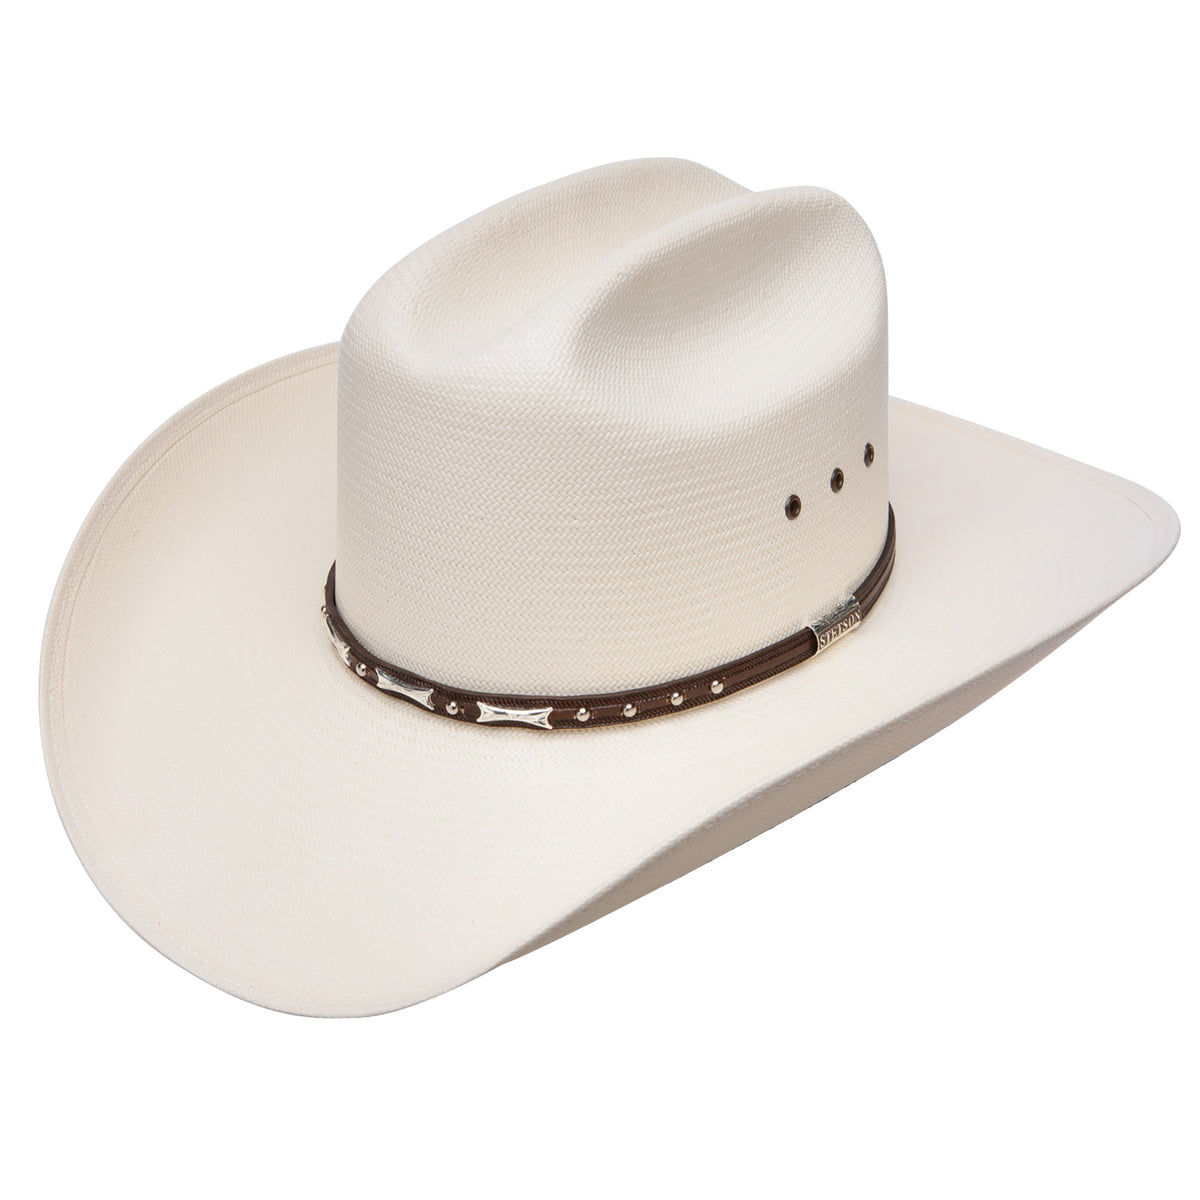 Stetson Trey 10x Natural Resistol And Stetson Hats Mexico